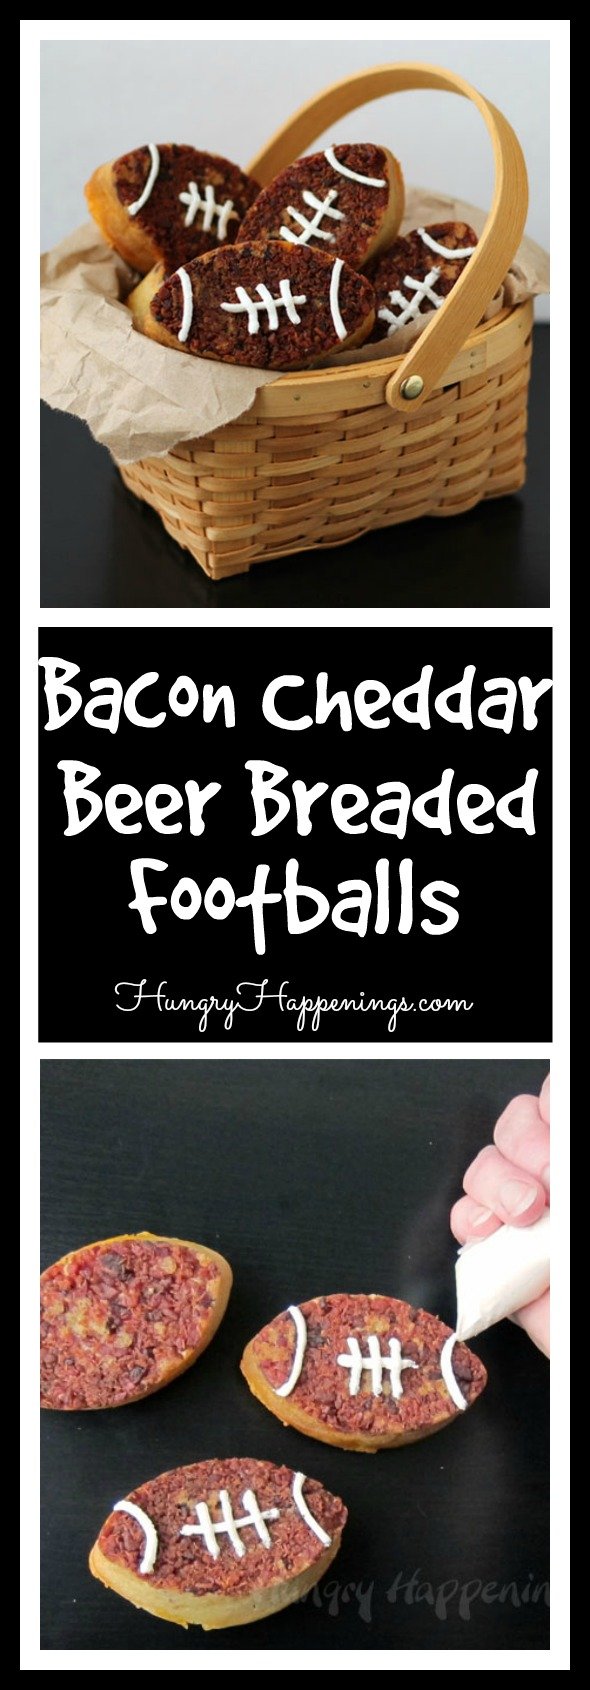 You've heard of a bread basket. But I don't think you've ever heard of one filled with Bacon Cheddar Beer Bread Footballs! Like come on, what isn't there to like in these delicious grains.